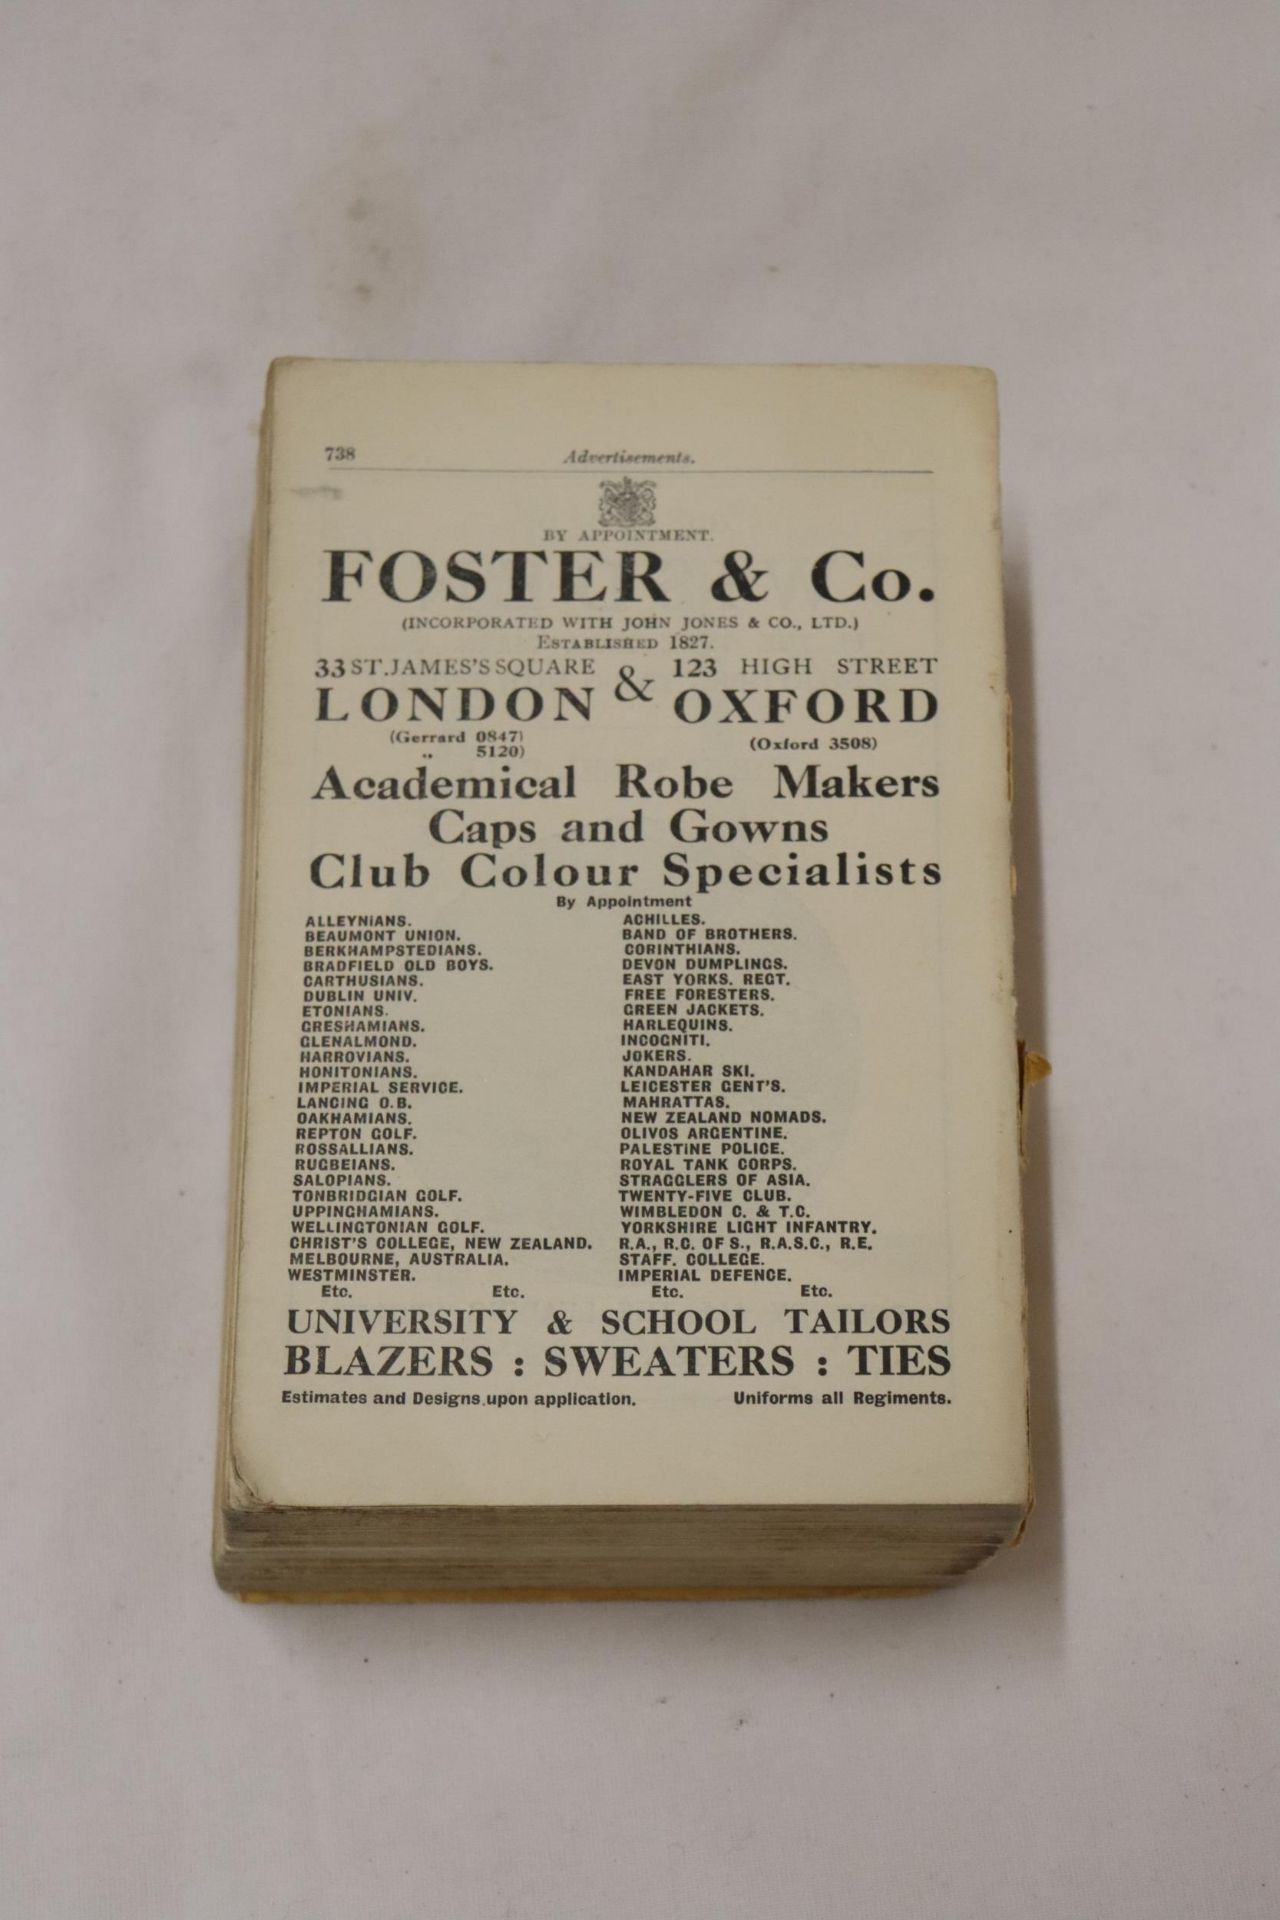 A 1930 COPY OF WISDEN'S CRICKETER'S ALMANACK. THIS COPY IS IN VERY USED CONDITION AND IS MISSING A - Image 4 of 4